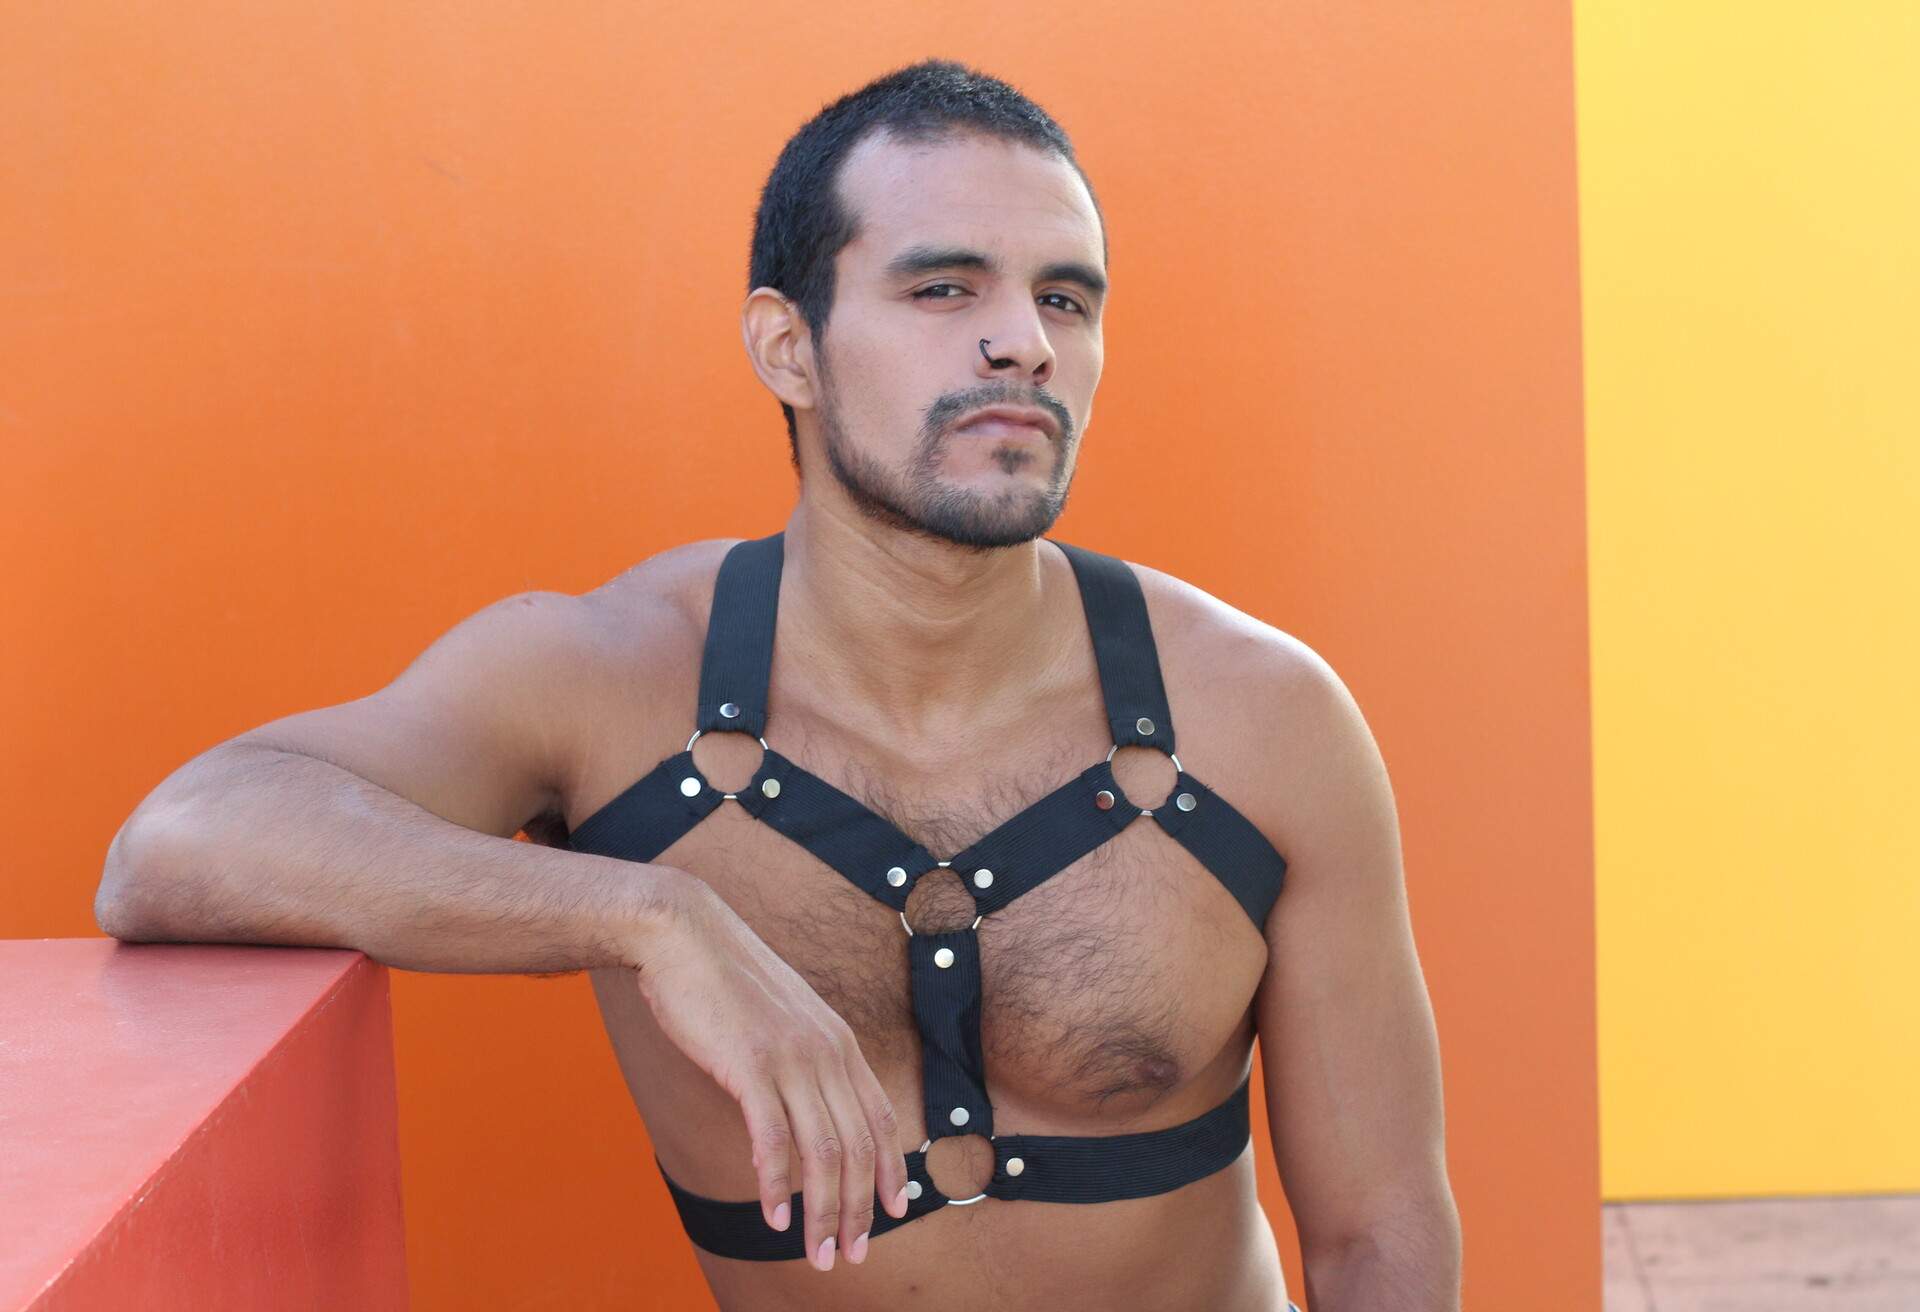 A man wearing a chest harness standing against an orange wall.